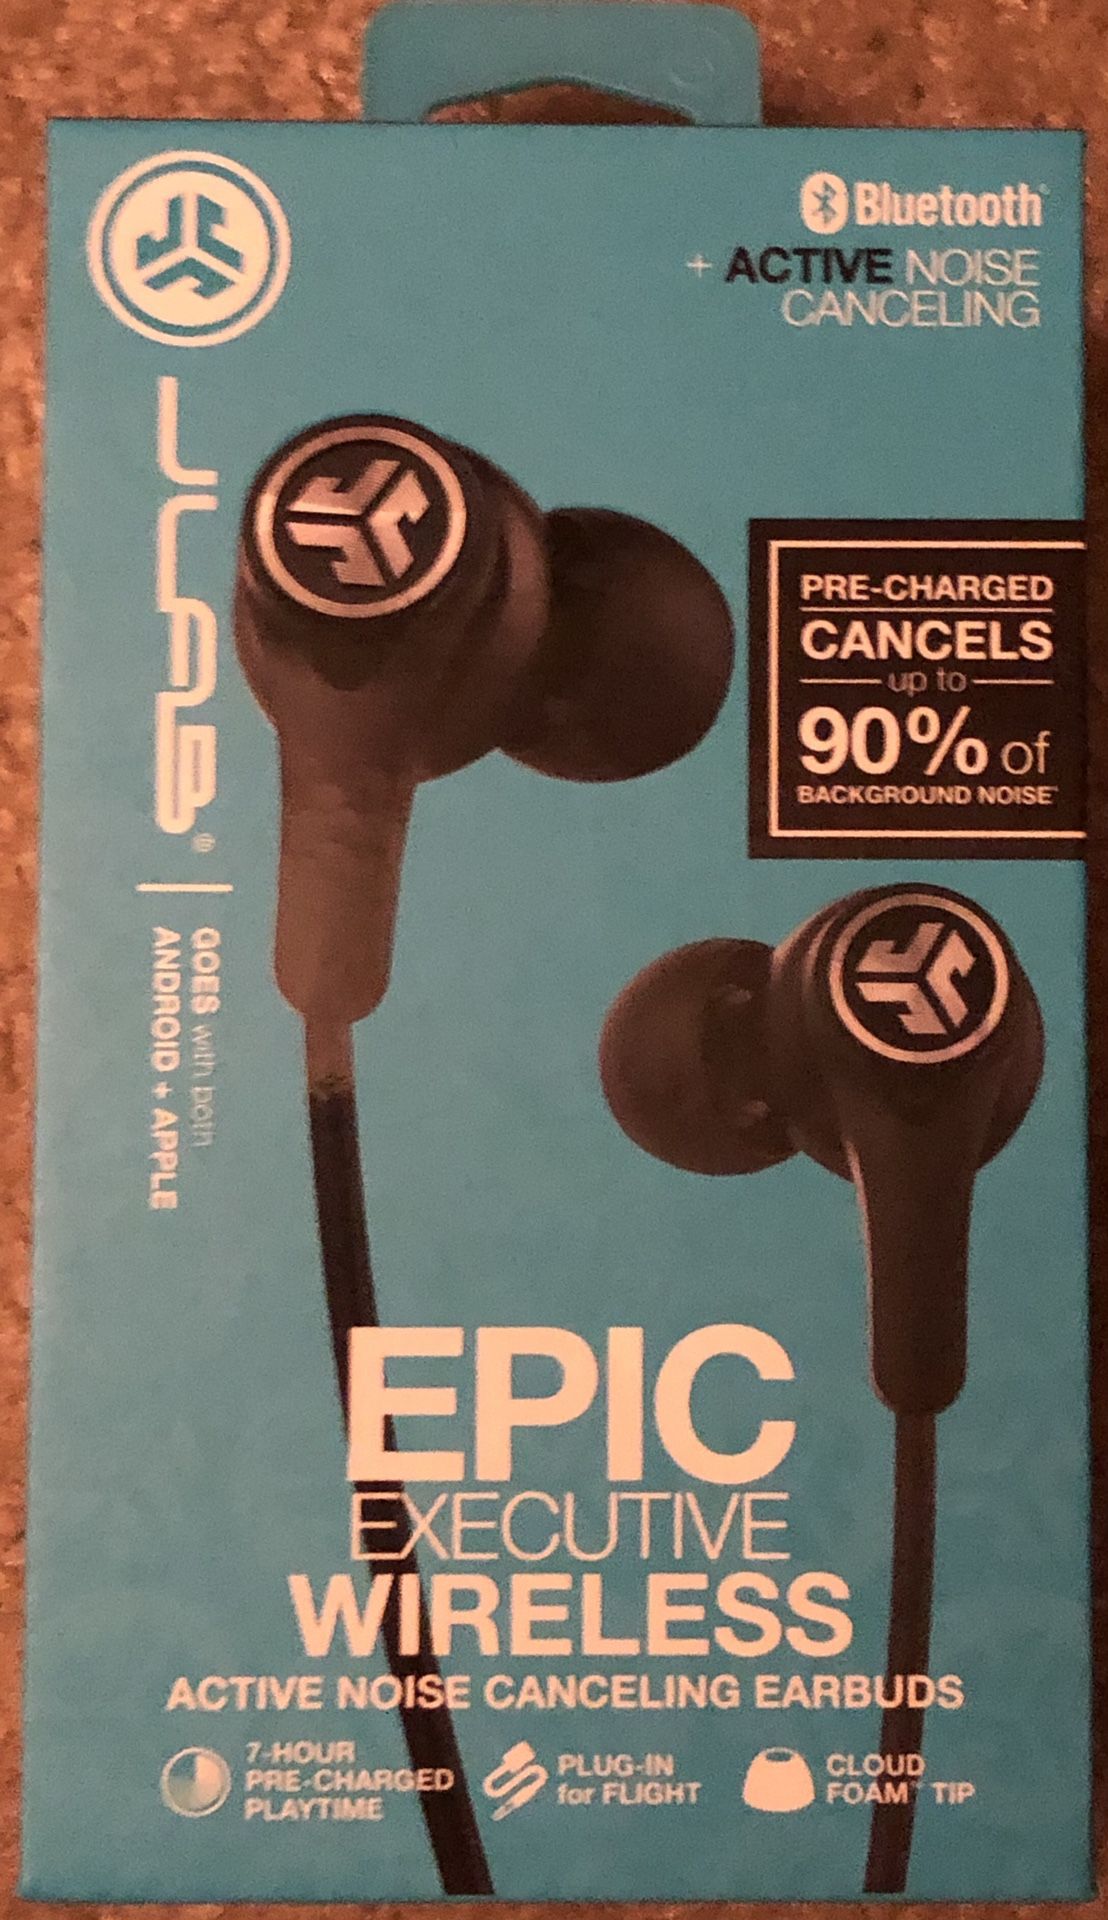 New Jlab Epic Executive Wireless Active noise canceling earbuds